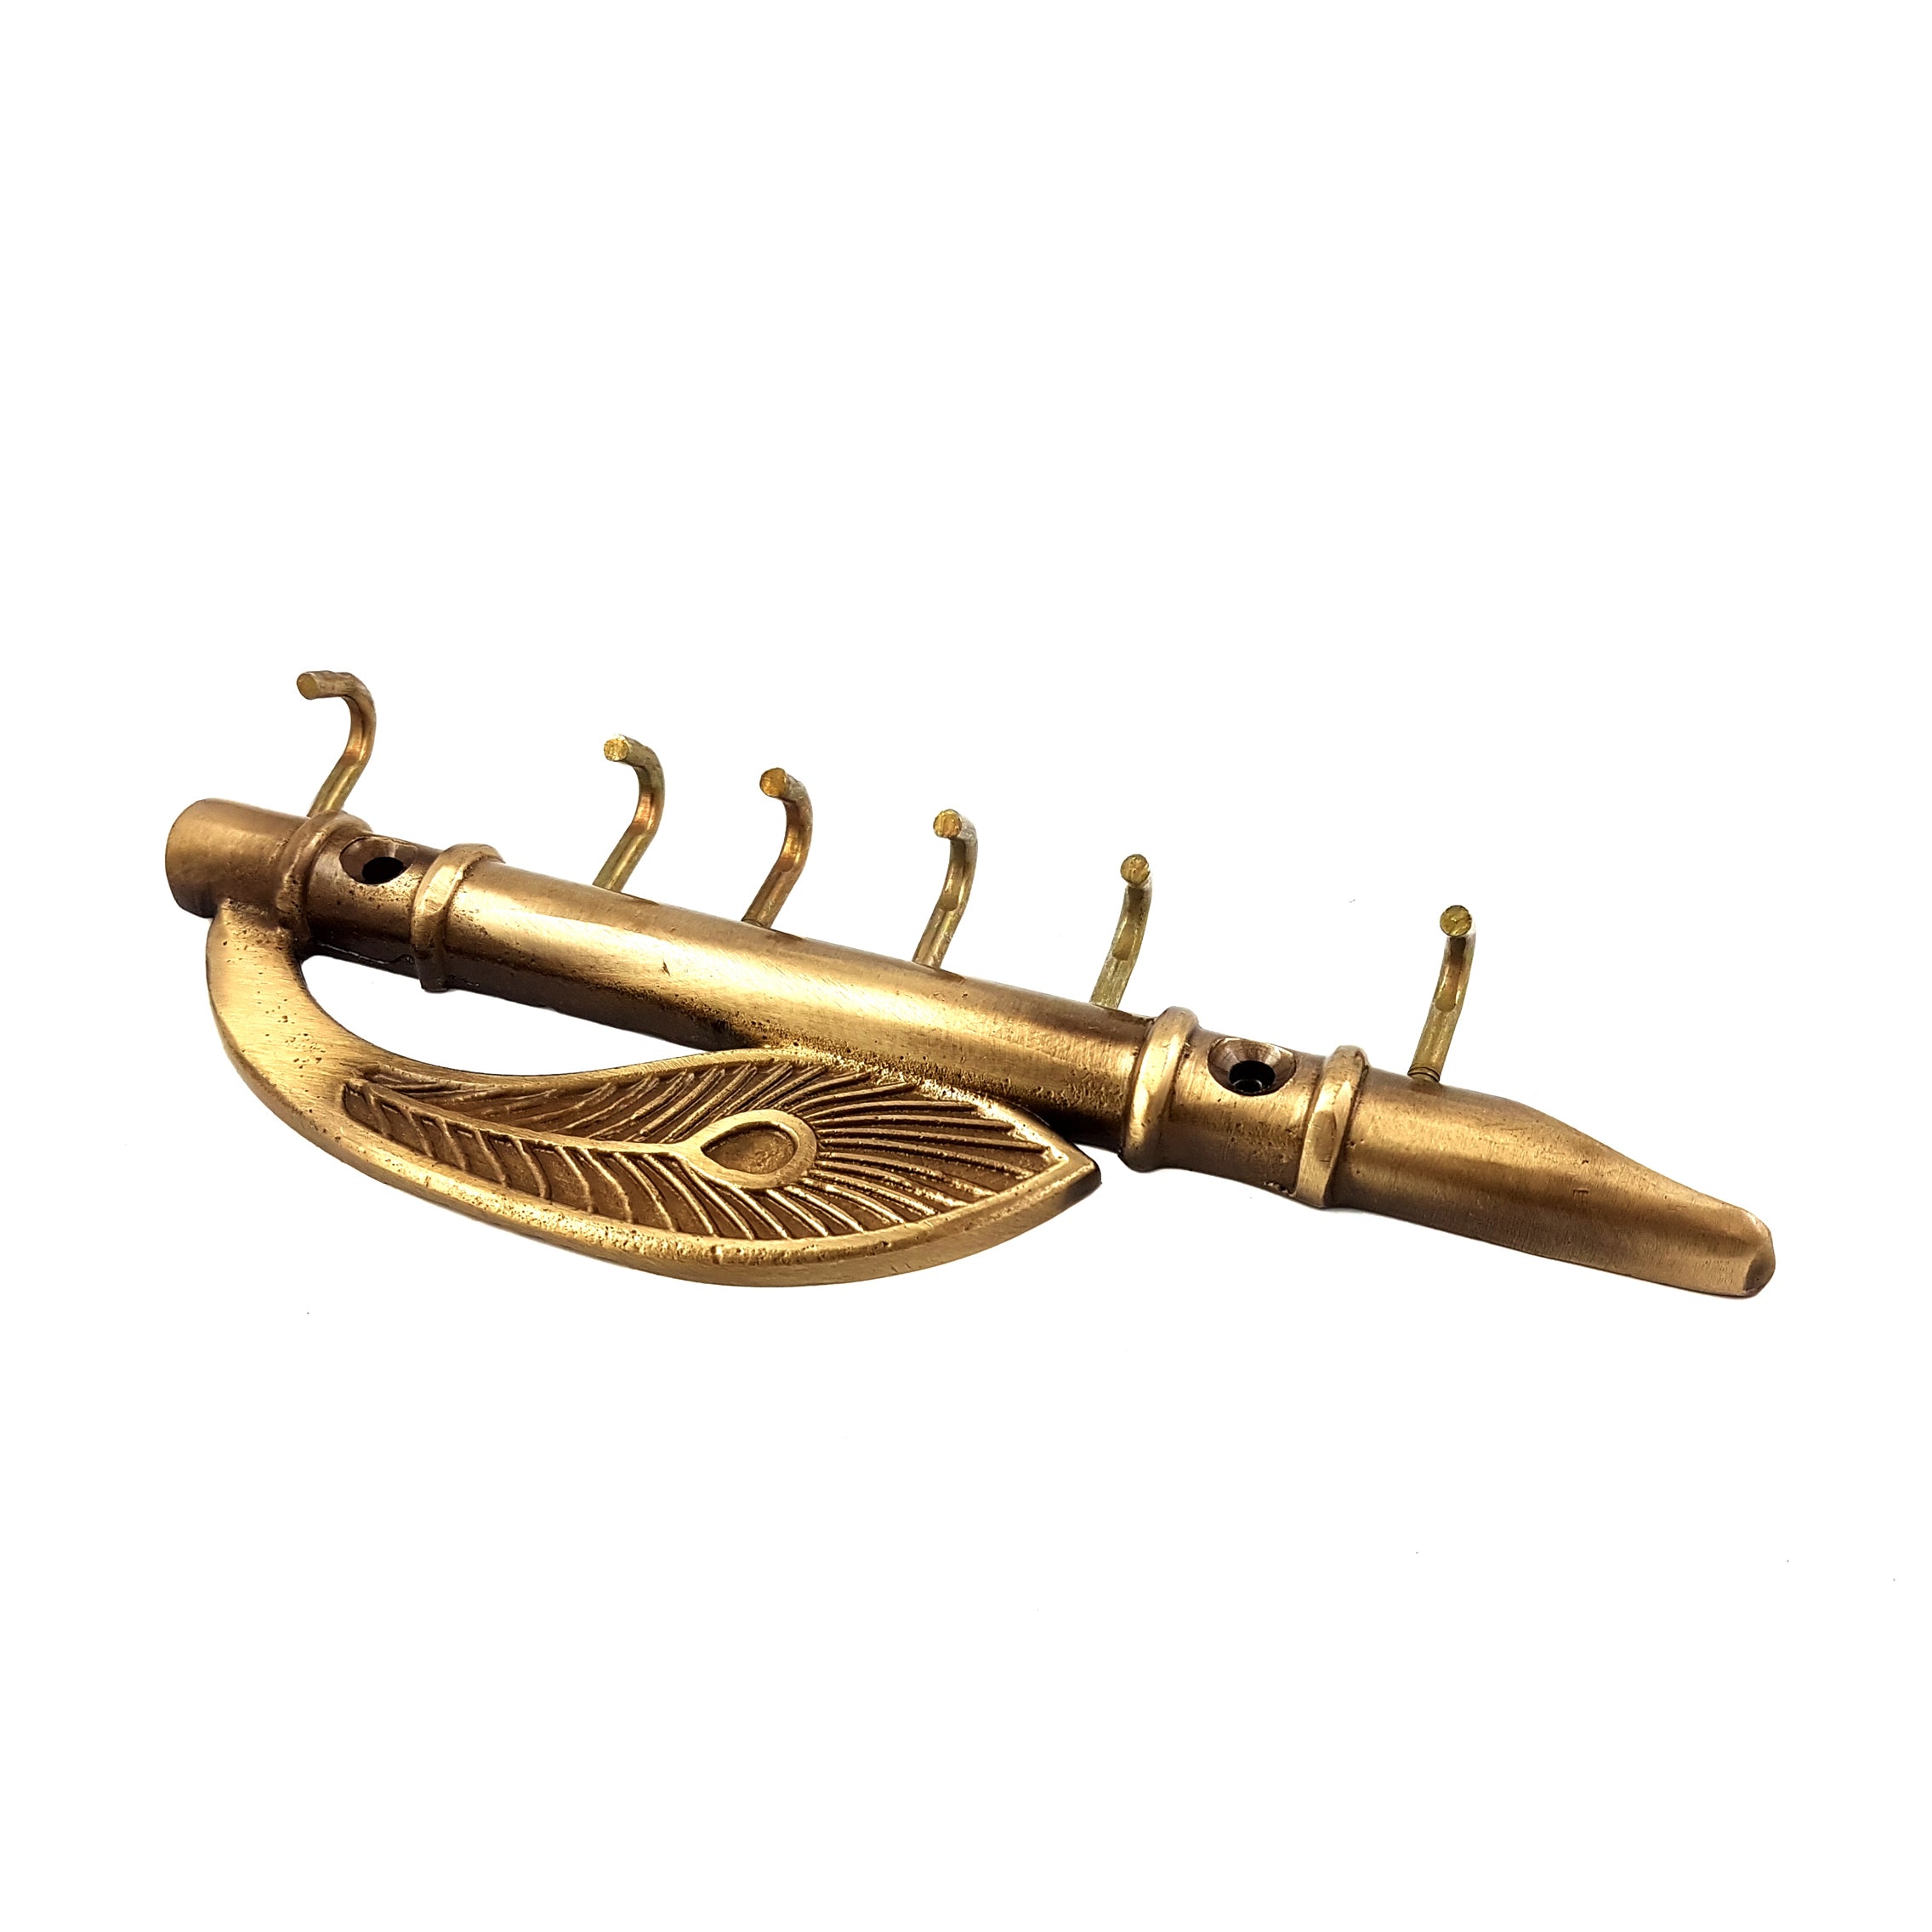 Brass Flute and Peacock Quills Key Holder with 6" Hooks for Utility and Home Decor